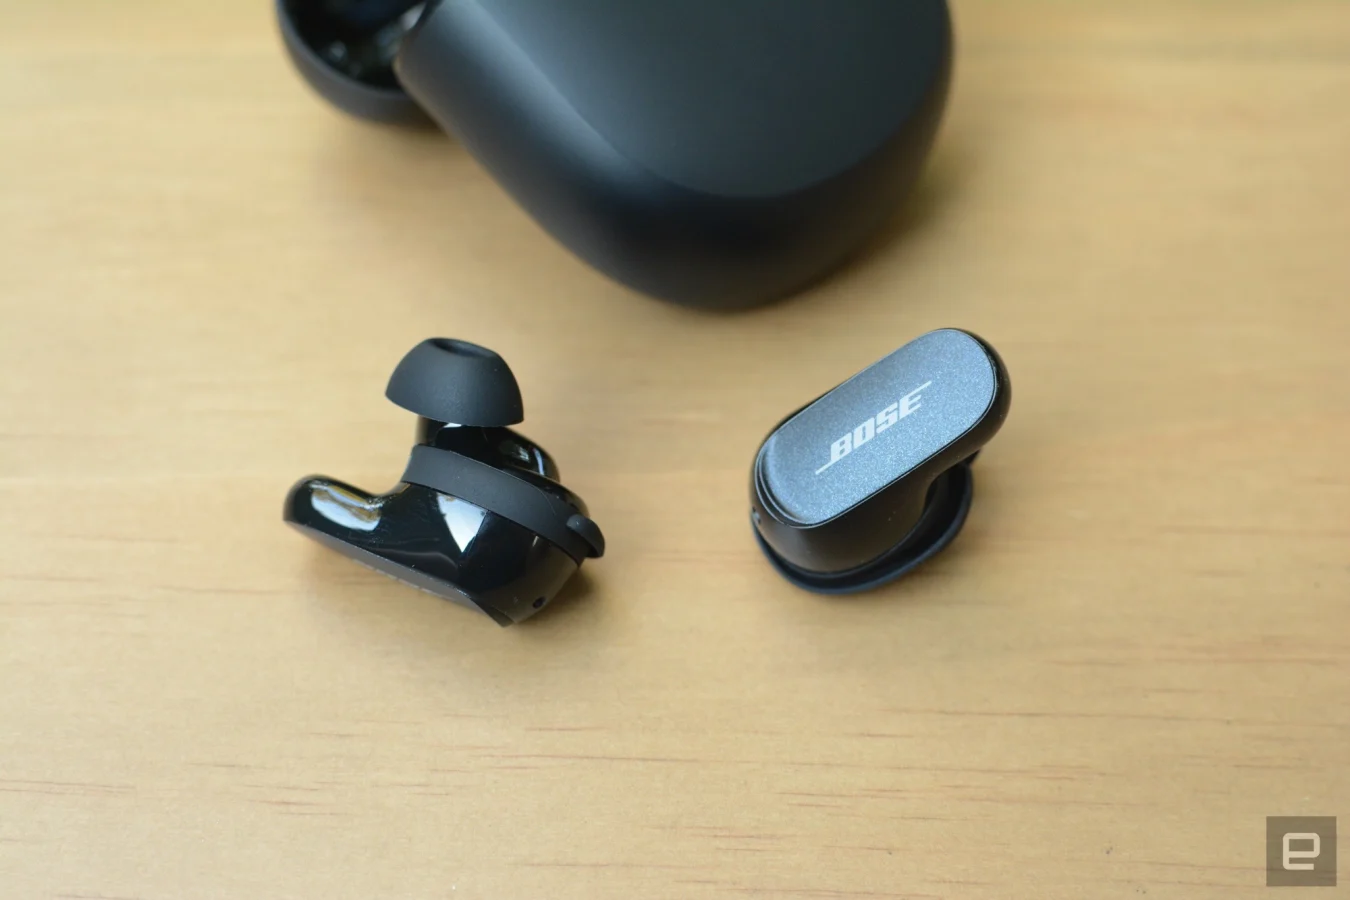 The noise-blocking crown is safe.  Bose has upgraded the level of sound it cancels out on the QuietComfort Earbuds II, canceling out more everyday noise including voices.  Sound quality is also noticeably improved, and the smaller buds provide a more comfortable (and less awkward-looking) fit.  There's still room for further improvement as the company has delivered on basics like multipoint connectivity and wireless charging. 